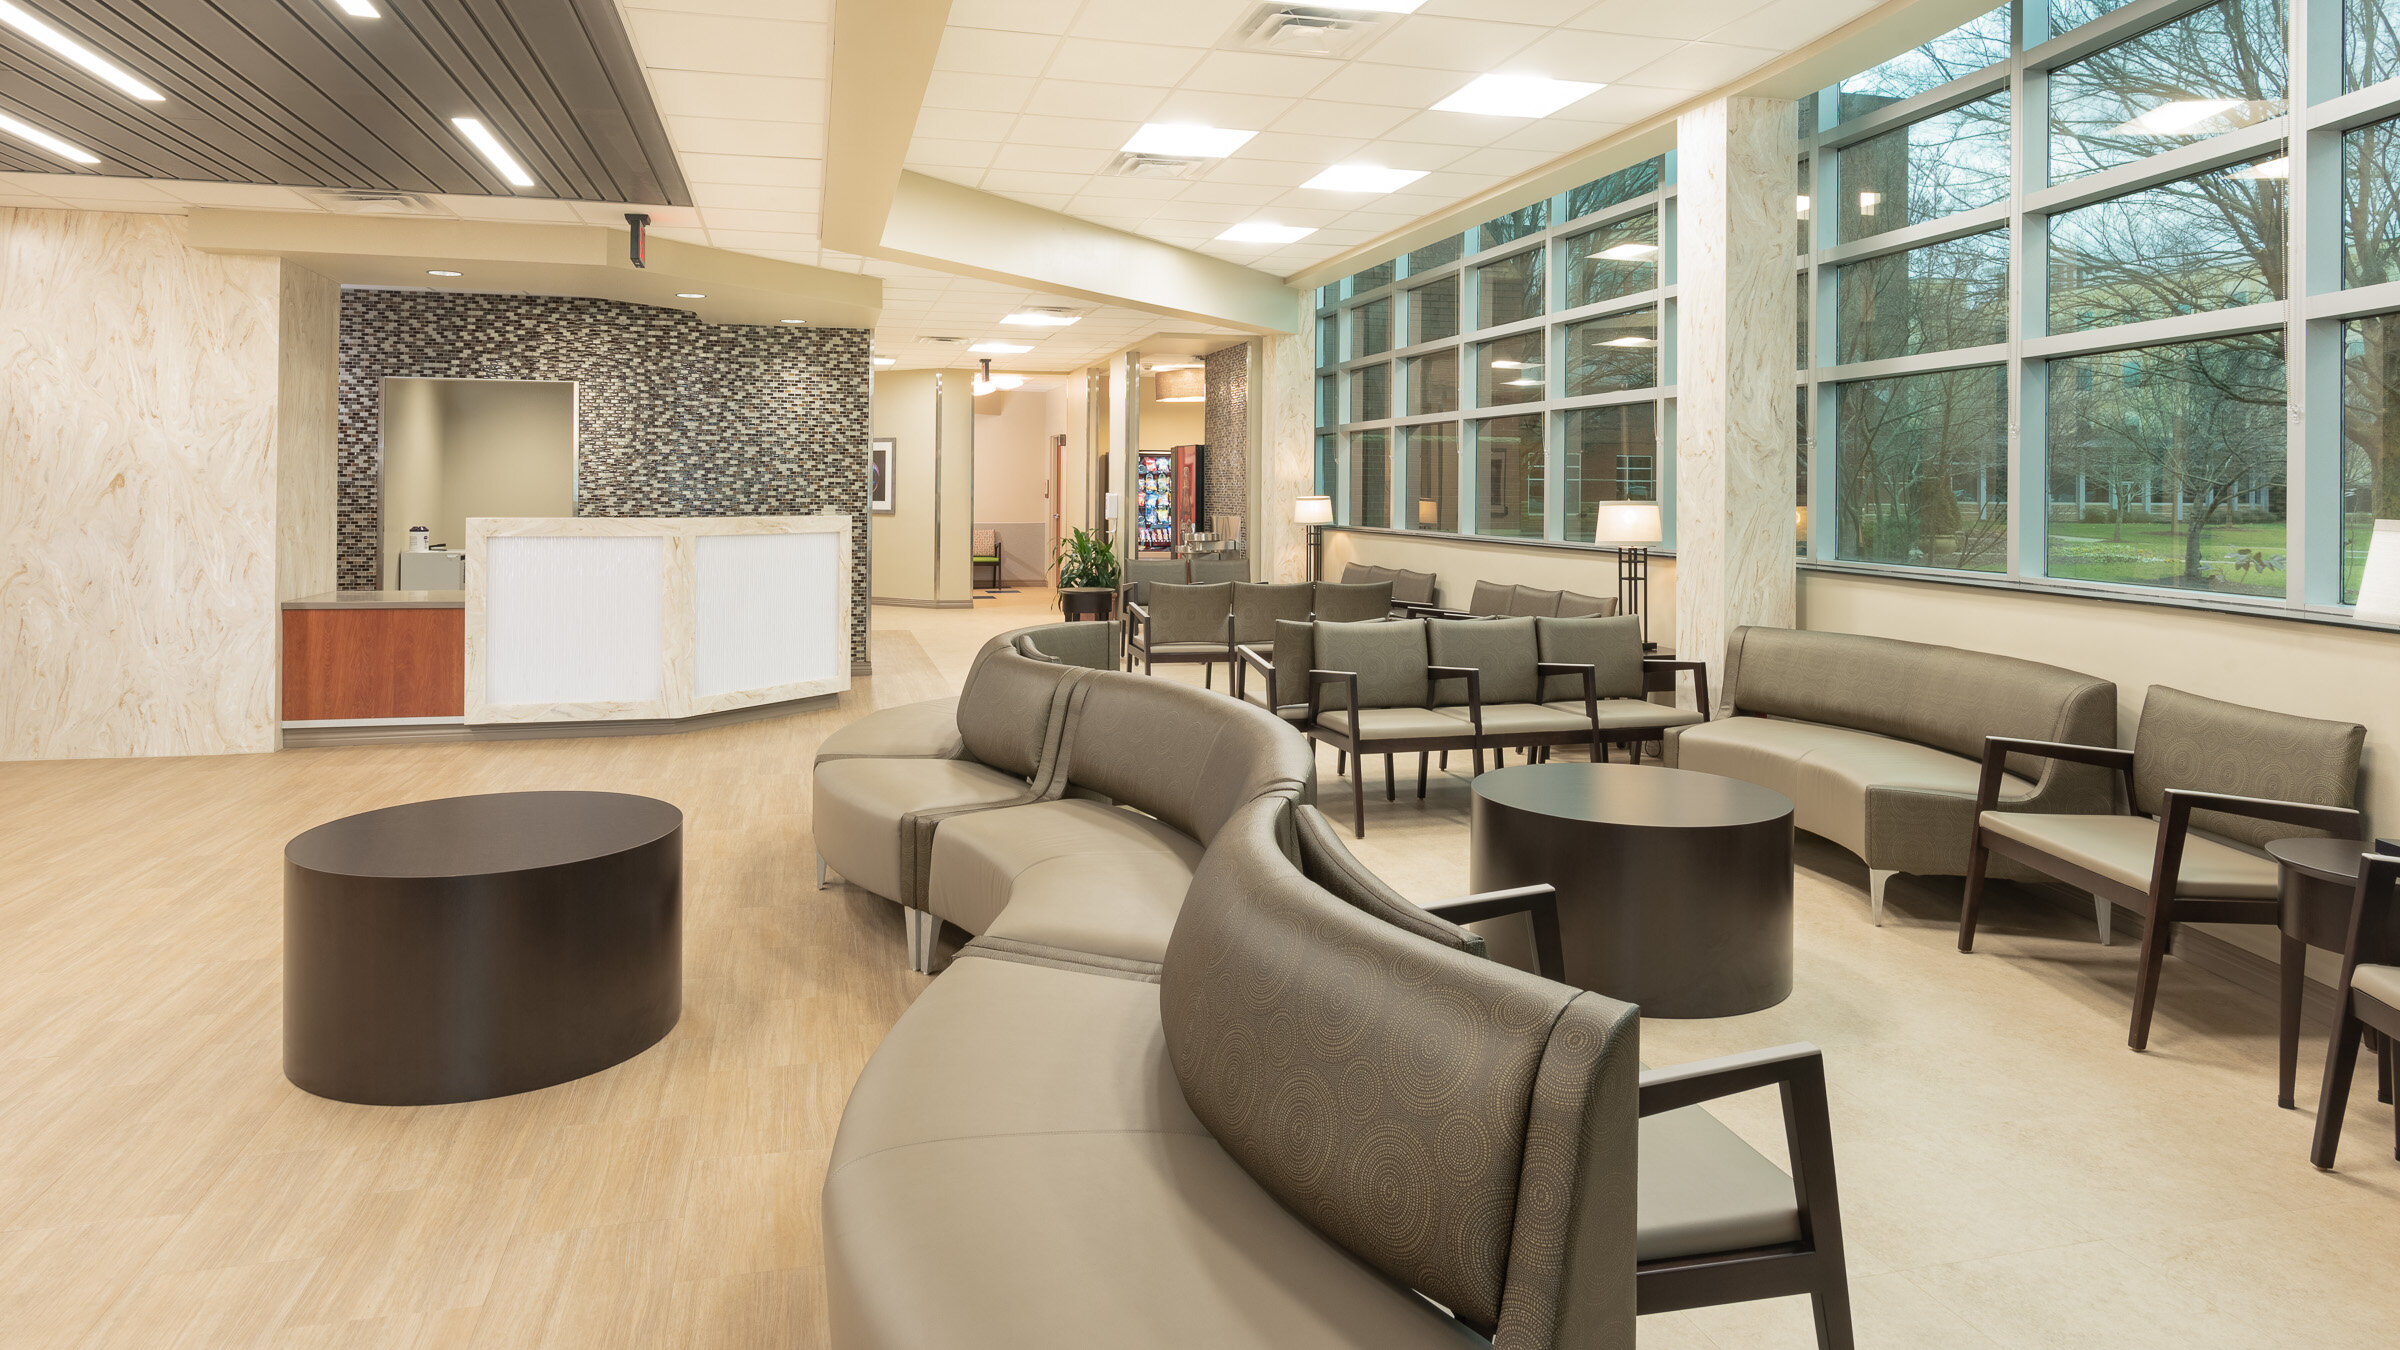 hlth-arch-emergency-room-renovation-waiting-area.jpg